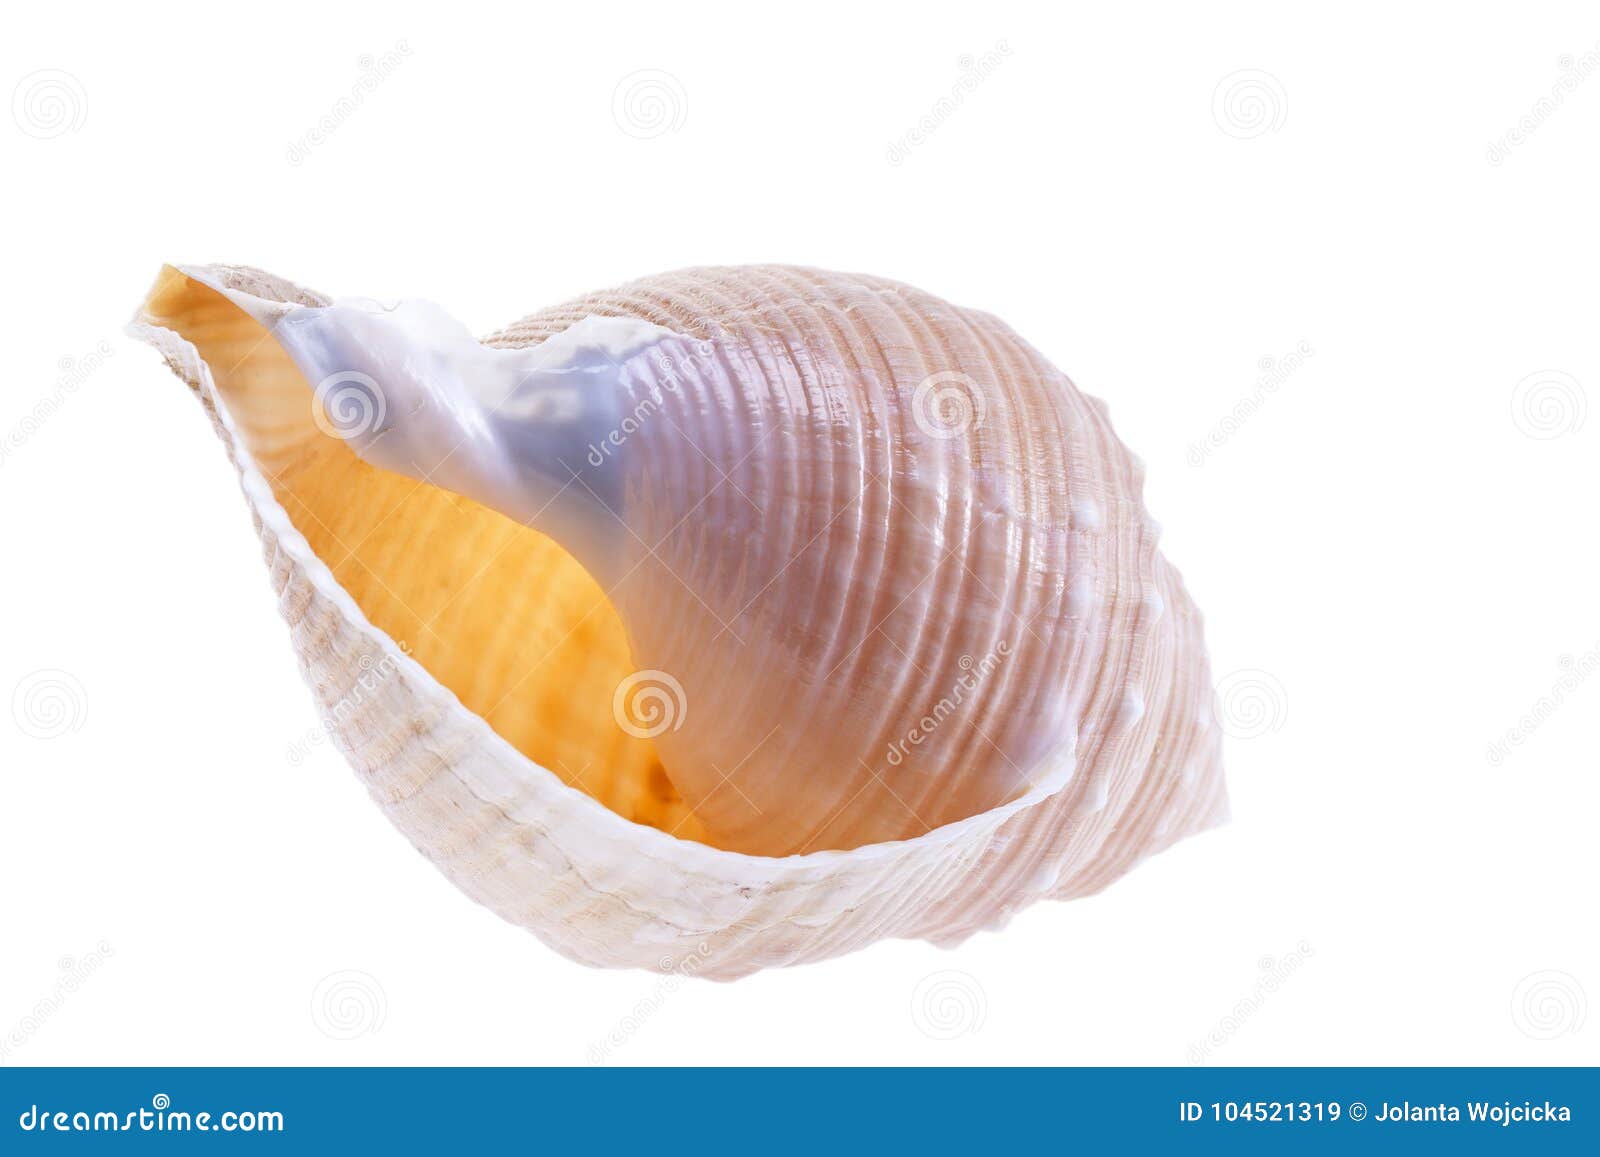 Still Life Of Small Shells On A White Background. Sea Shells. Stock Photo,  Picture and Royalty Free Image. Image 138716634.